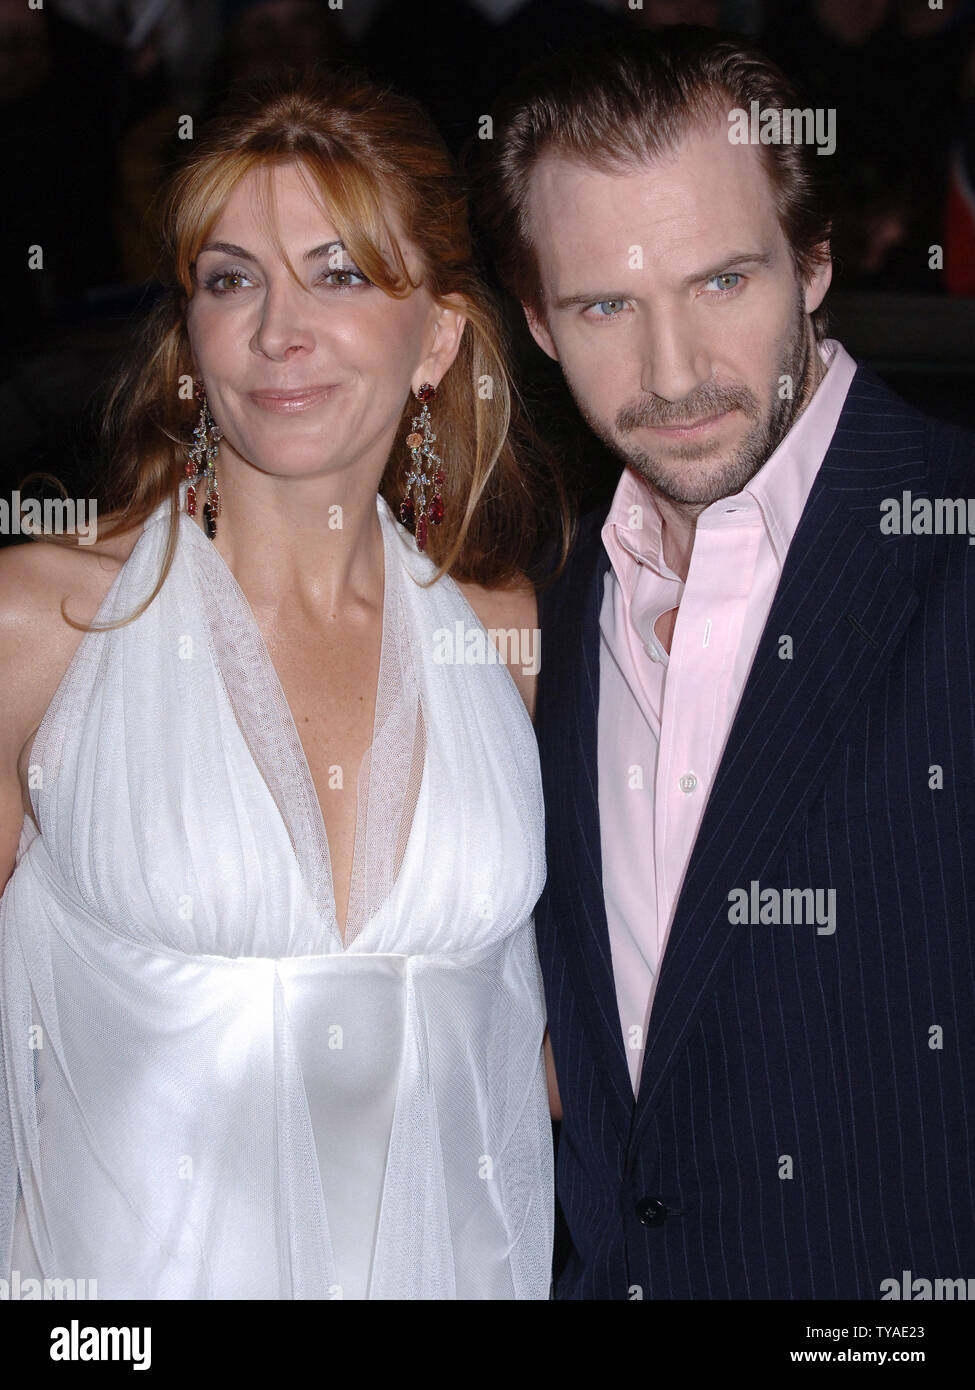 British actress Natasha Richardson and actor Ralph Fiennes attend the British premiere of 'The White countess' at  Curzon Mayfair  in London on March 19, 2006.(UPI Photo/Rune Hellestad) Stock Photo